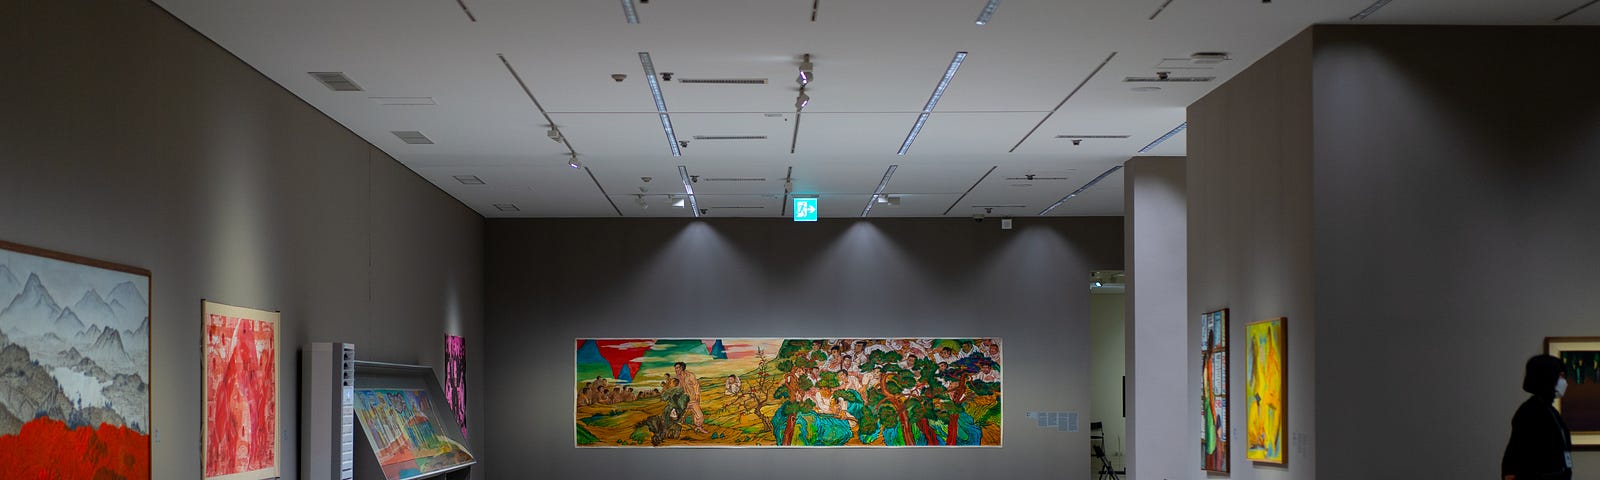 A modern art gallery with large, colourful paintings on walls